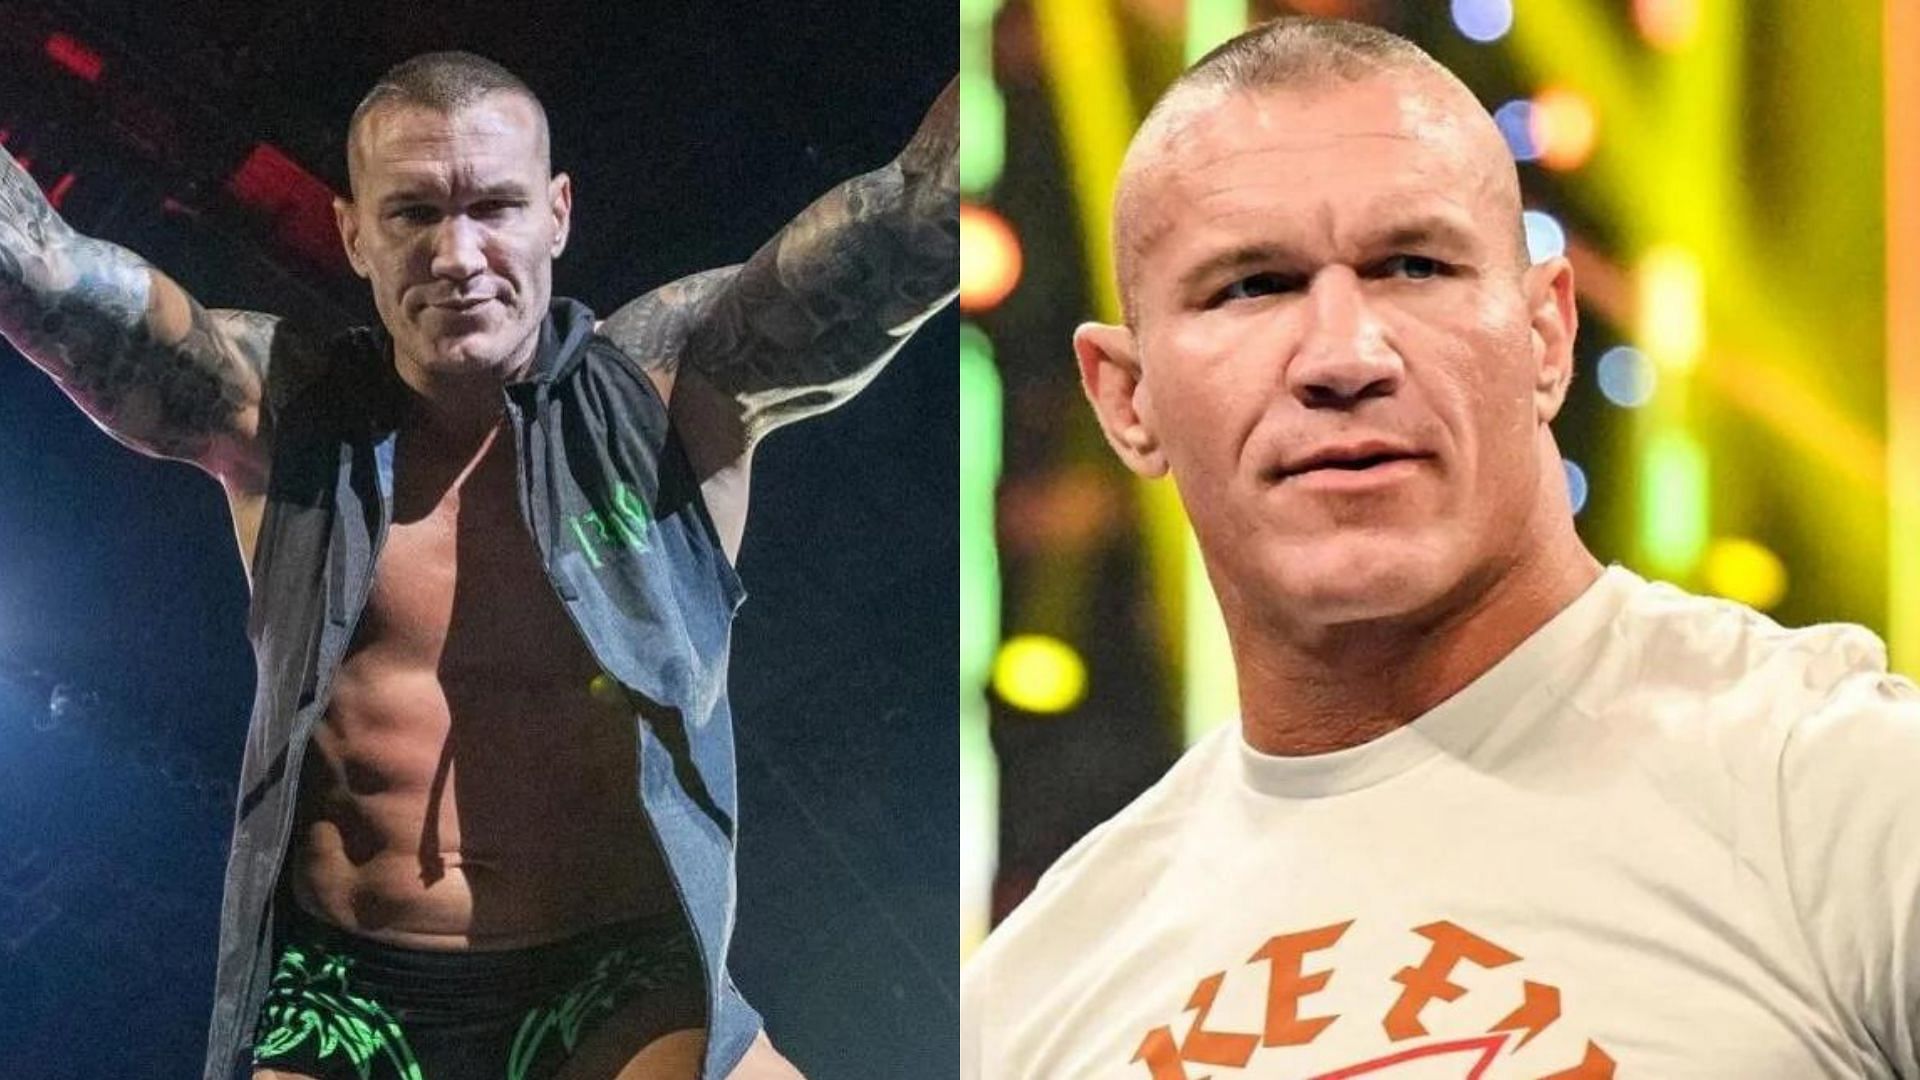 Randy Orton is in contention to become the new #1 contender for Roman Reigns